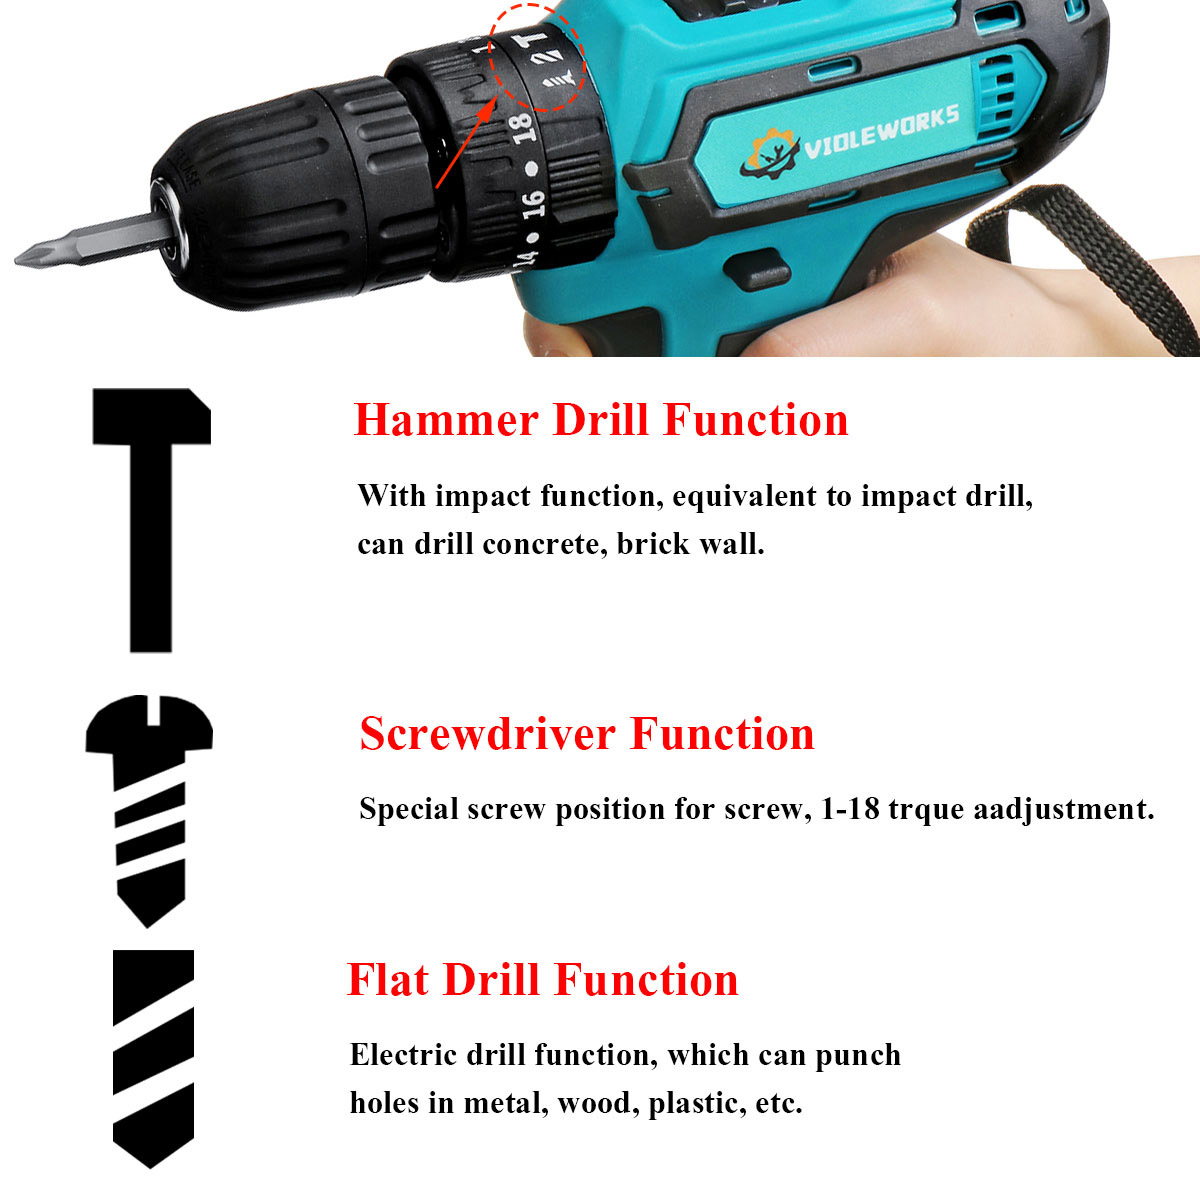 2-Speed-Power-Drills-6000mah-Cordless-Drill-3-IN-1-Electric-Screwdriver-Hammer-Drill-with-2pcs-Batte-1416071-3